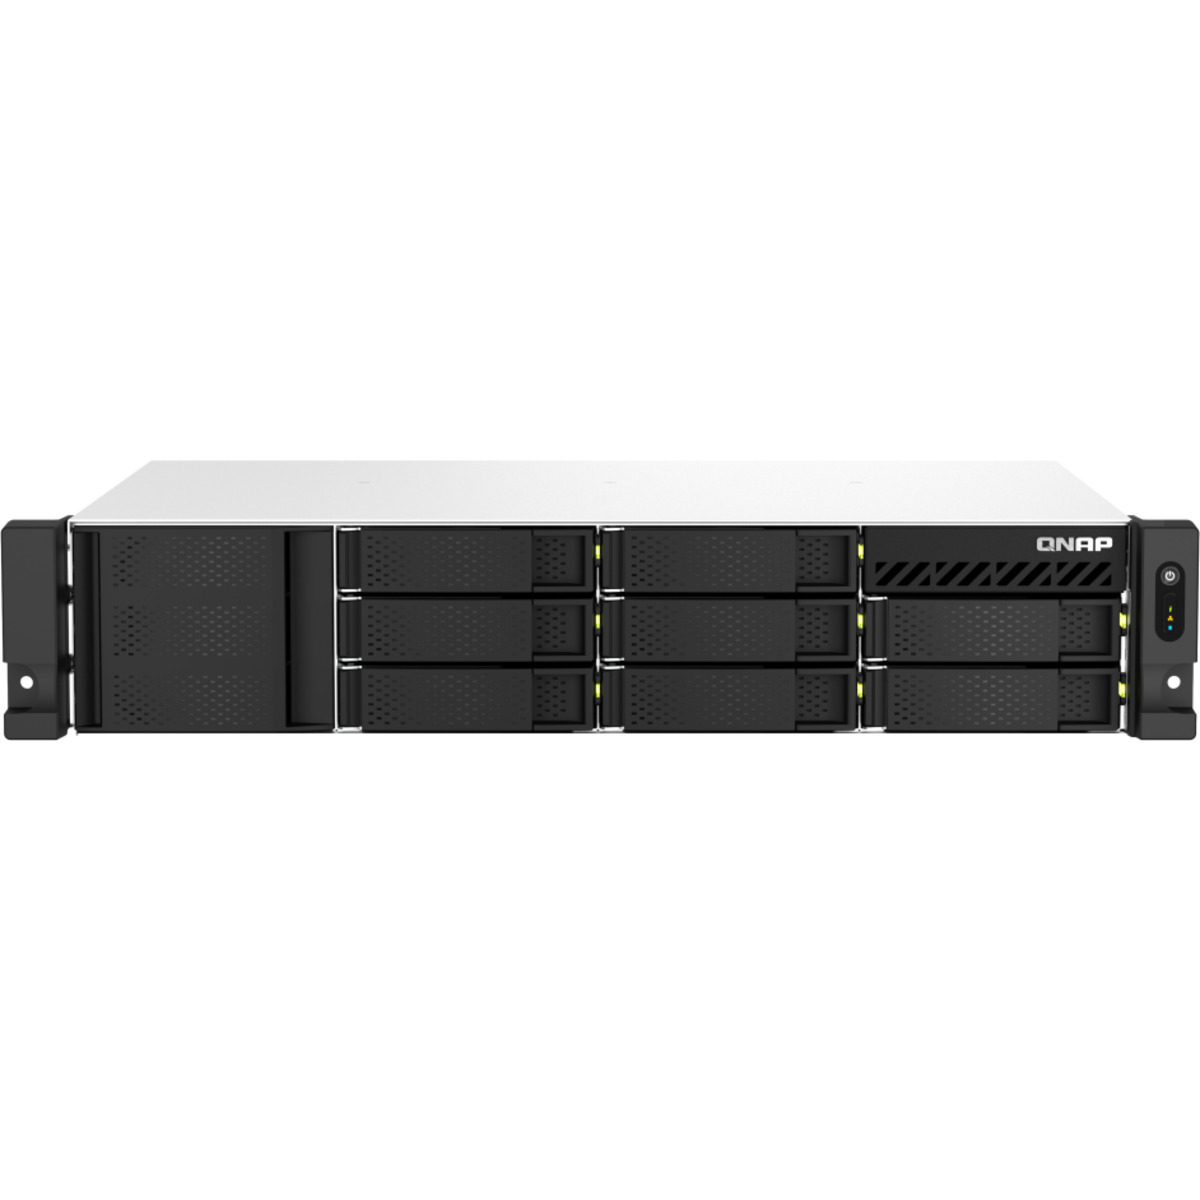 QNAP TS-873AeU-RP 80tb 8-Bay RackMount Multimedia / Power User / Business NAS - Network Attached Storage Device 4x20tb Western Digital Red Pro WD201KFGX 3.5 7200rpm SATA 6Gb/s HDD NAS Class Drives Installed - Burn-In Tested - FREE RAM UPGRADE TS-873AeU-RP